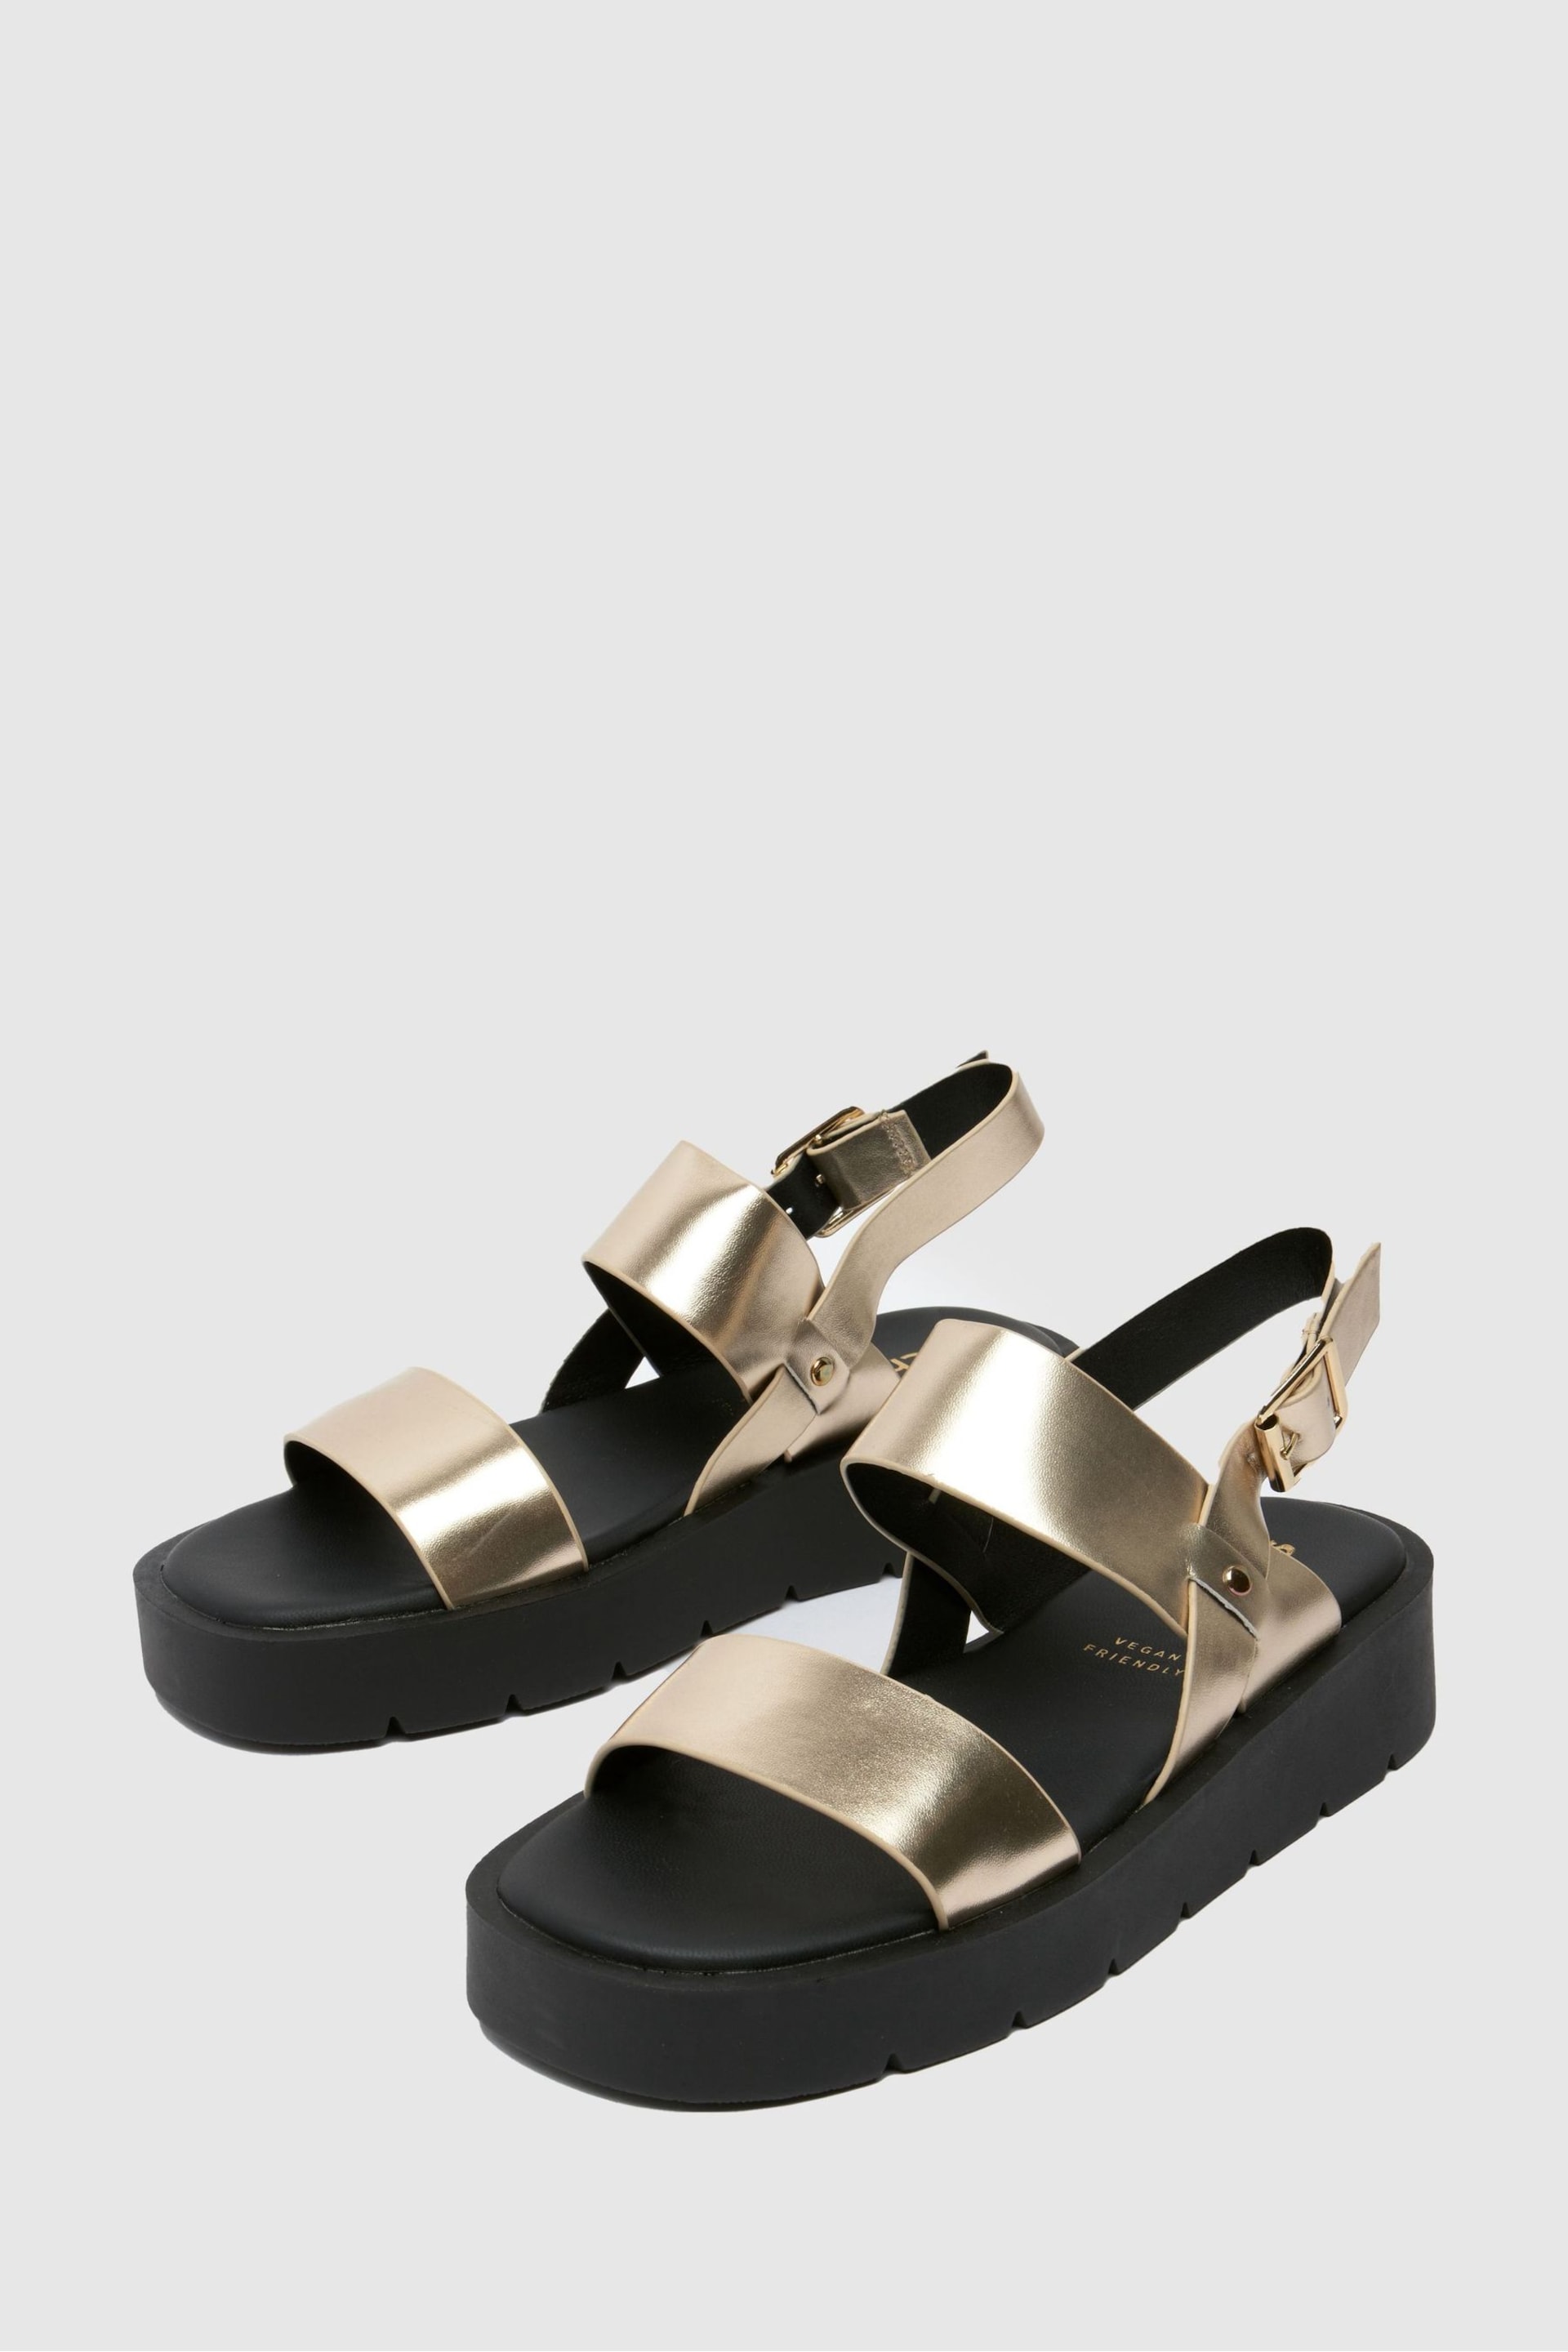 Schuh Tayla Chunky Sandals - Image 2 of 4